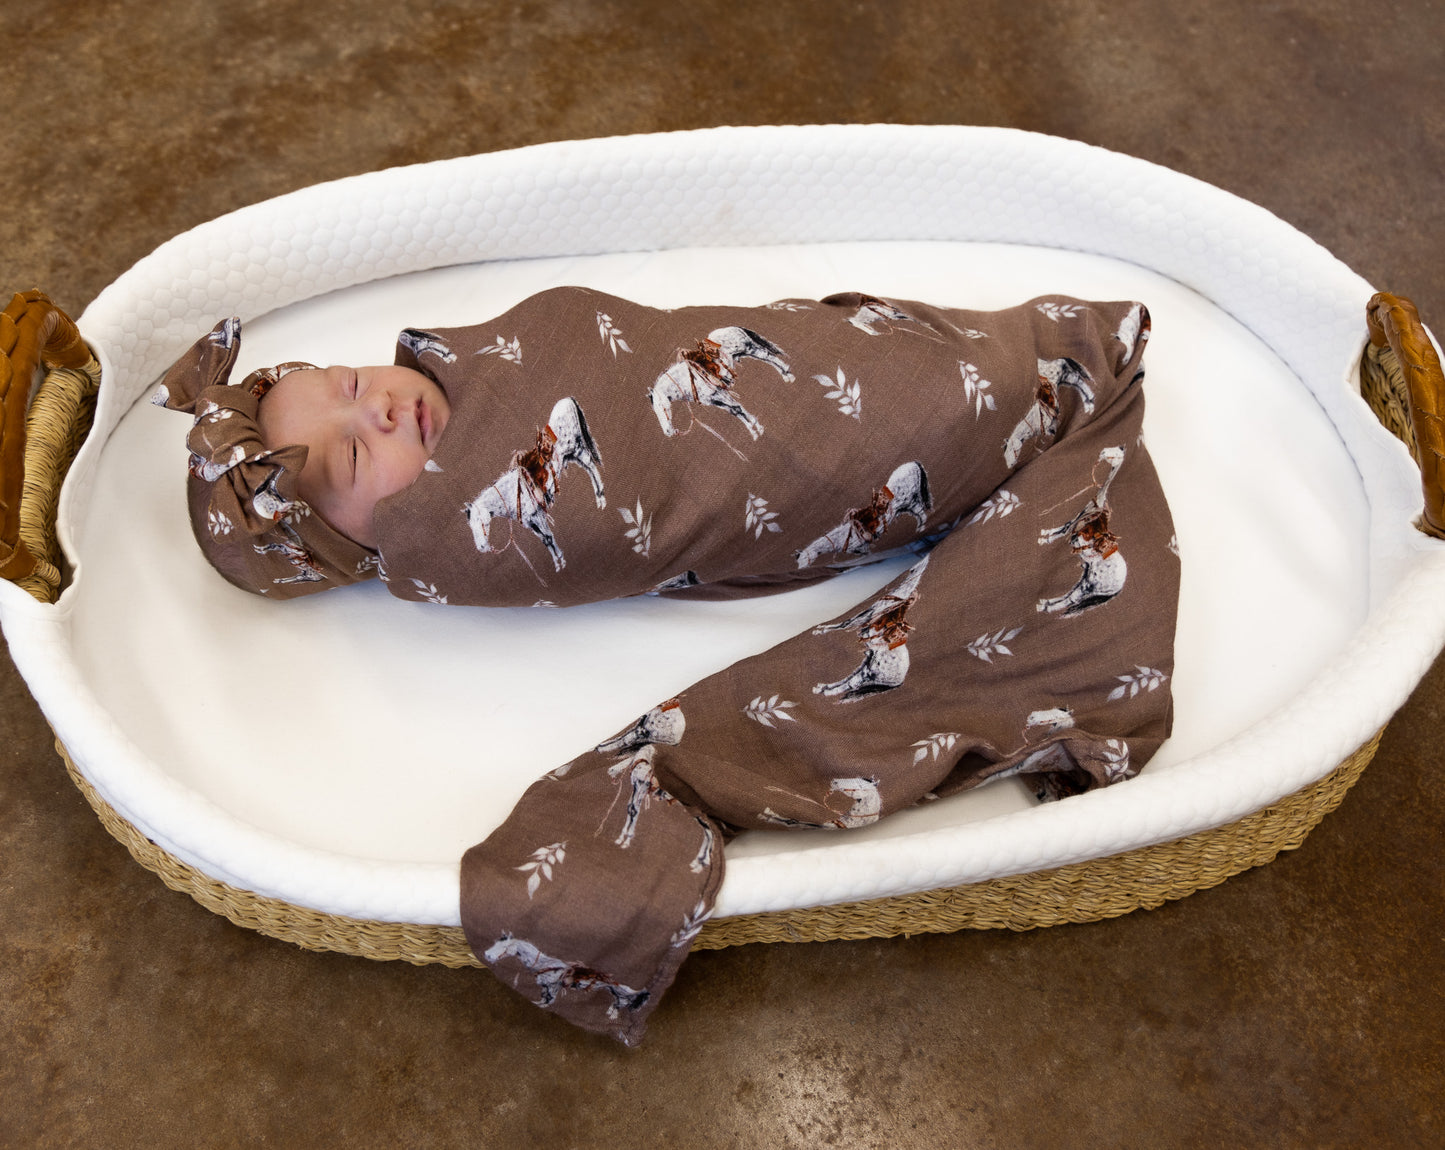 Almond Ranch Horse Bamboo Muslin Swaddle